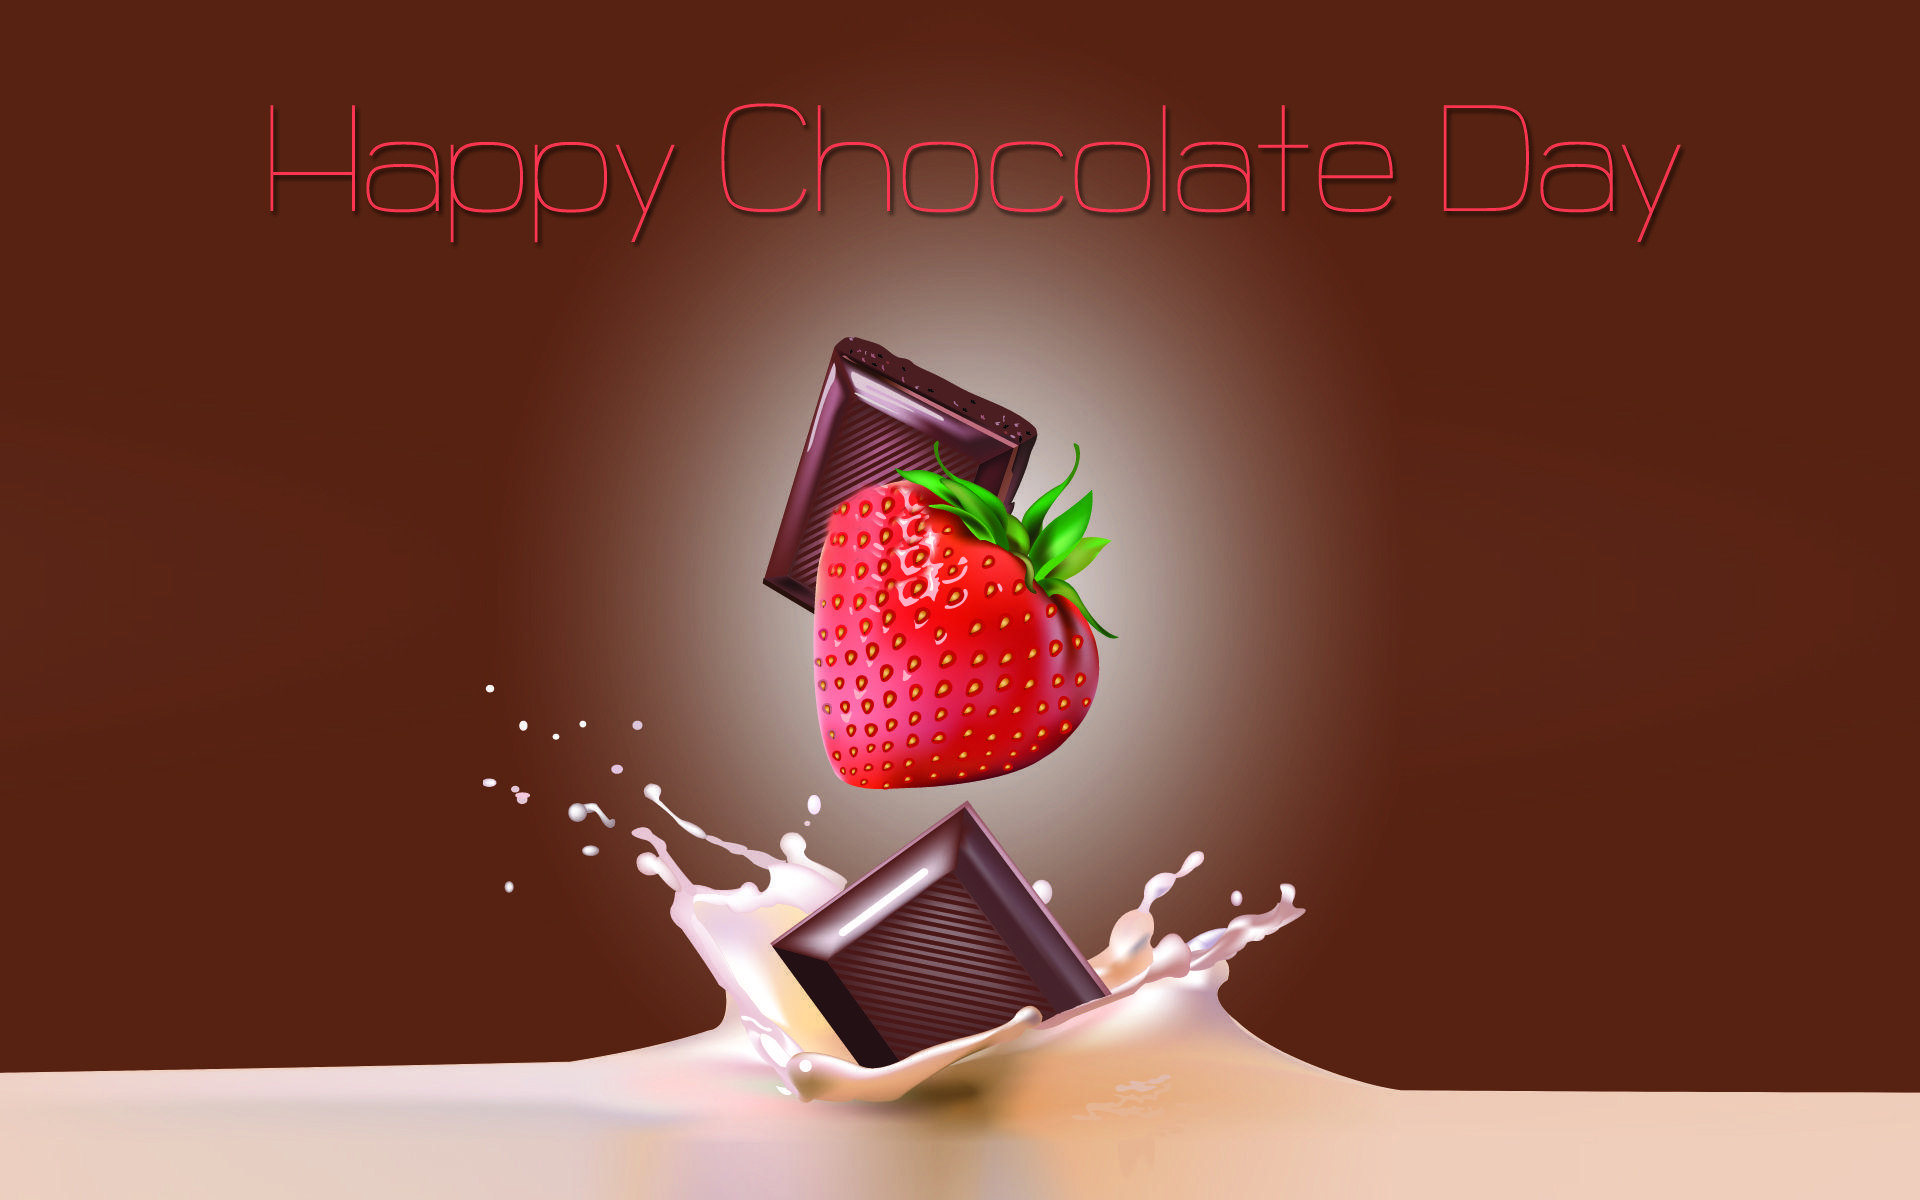 Happy Chocolate Day Quotes. Status For Facebook WhatsApp Instagram